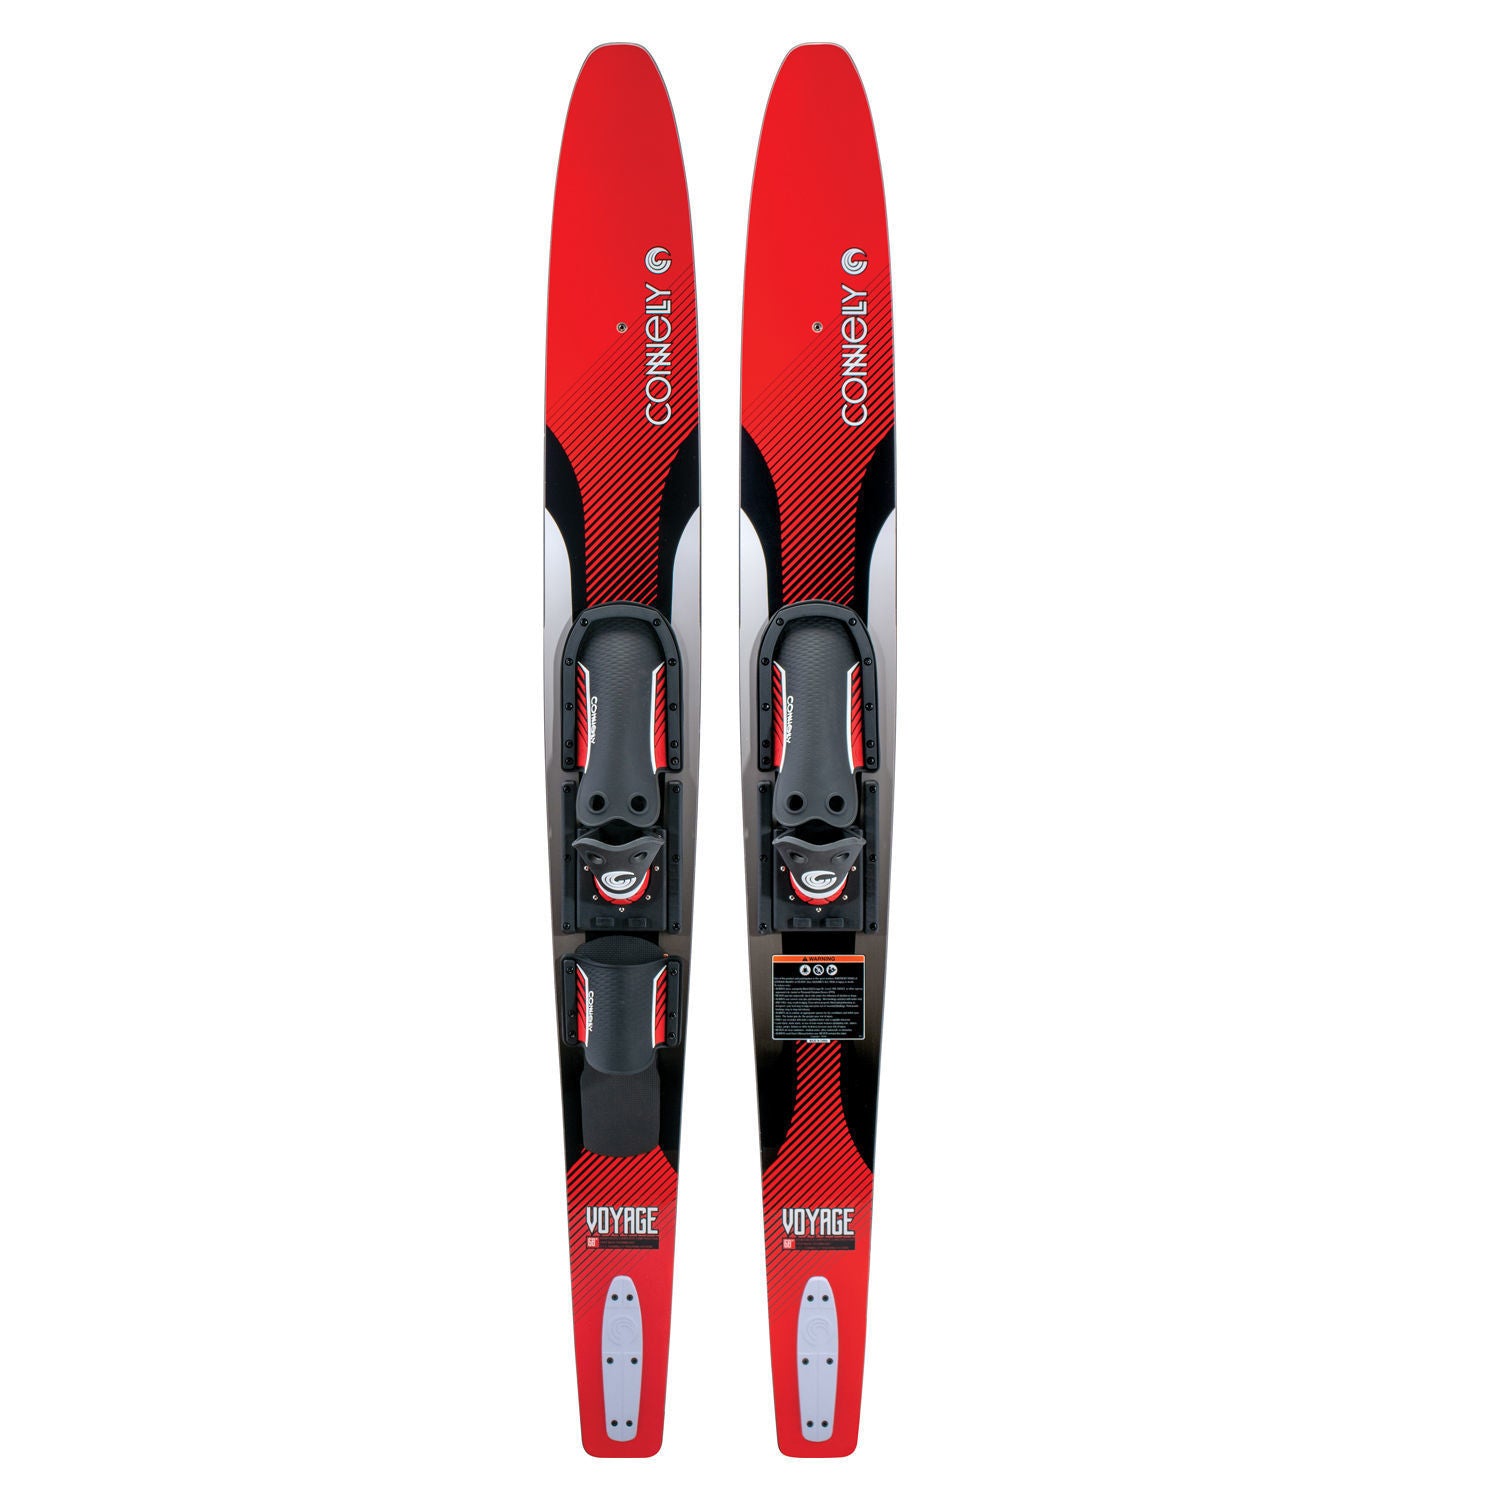 Connelly Water Skis | Connelly Water Ski Accessories | Fast